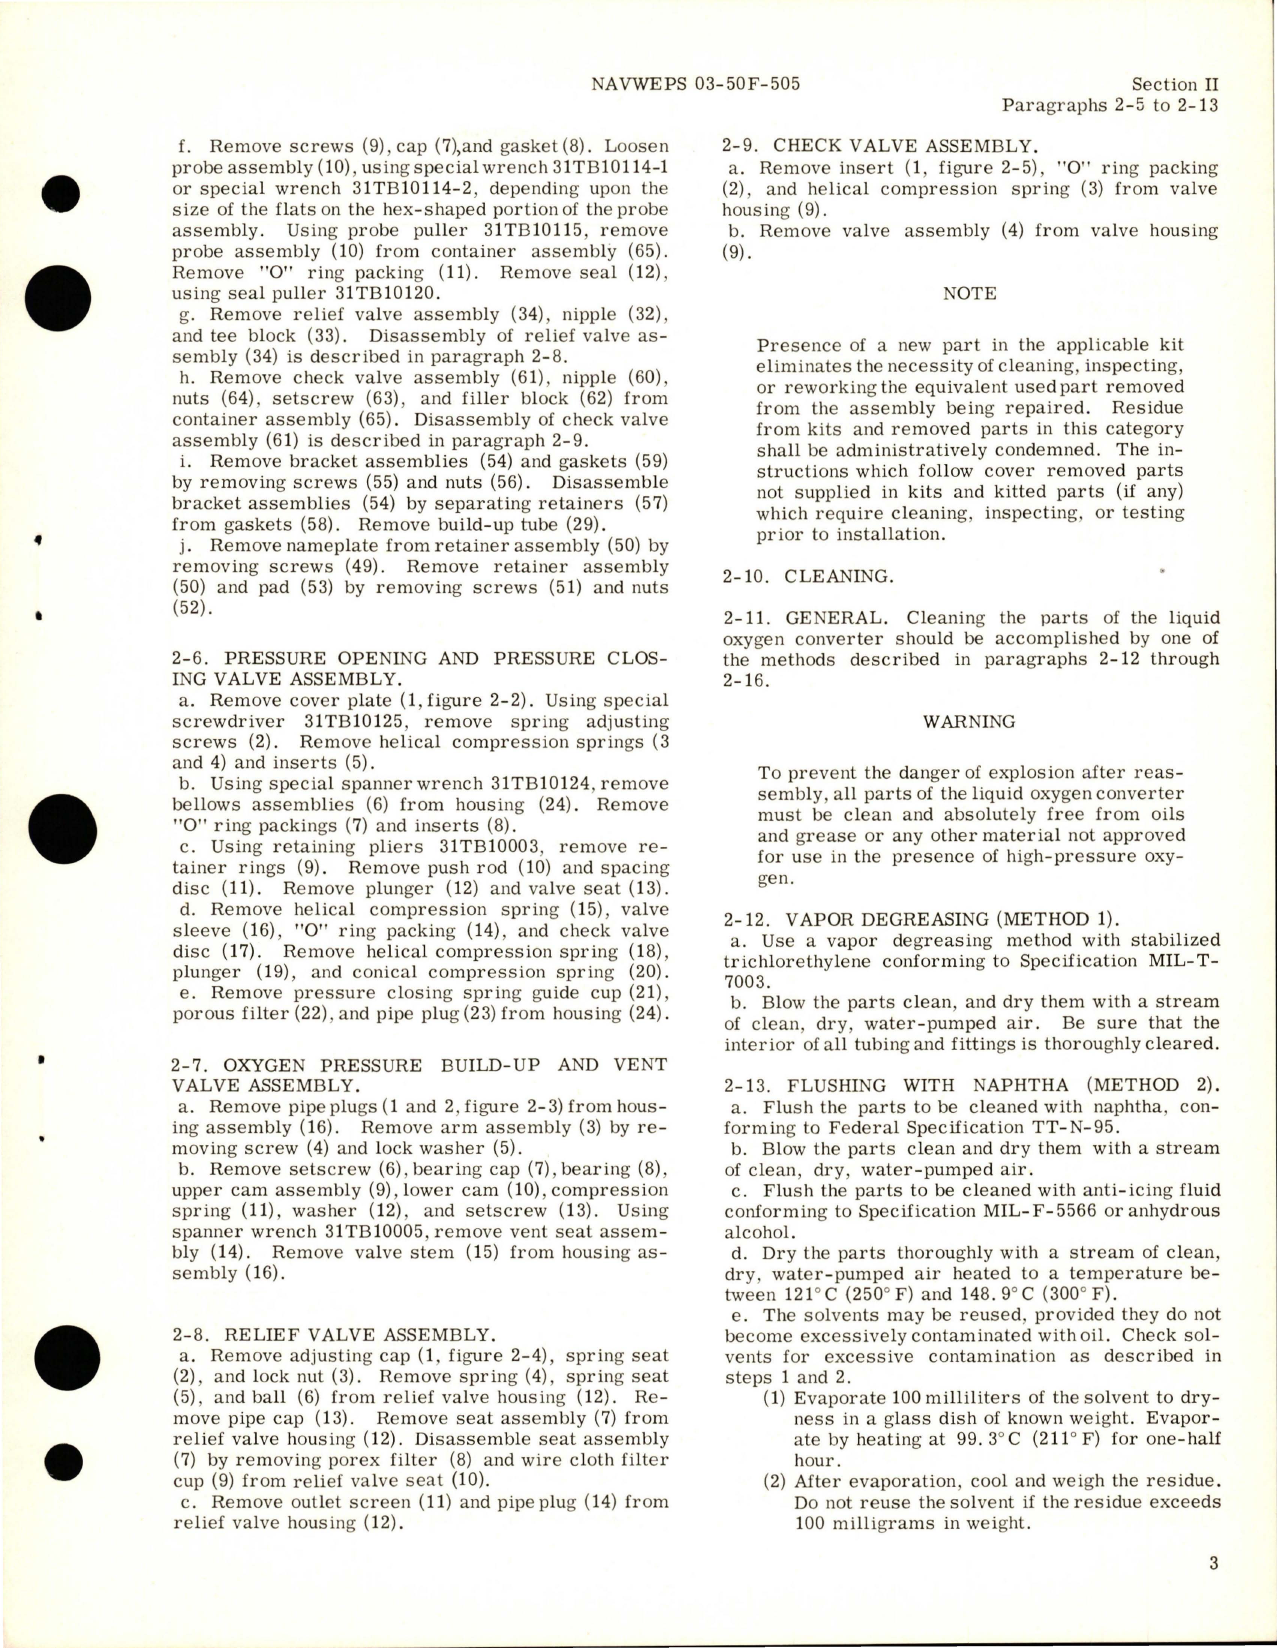 Sample page 7 from AirCorps Library document: Overhaul Instructions for Liquid Oxygen Converter - Types 29016-1-A1, 29022-1-A1, and 9022-1-A2 